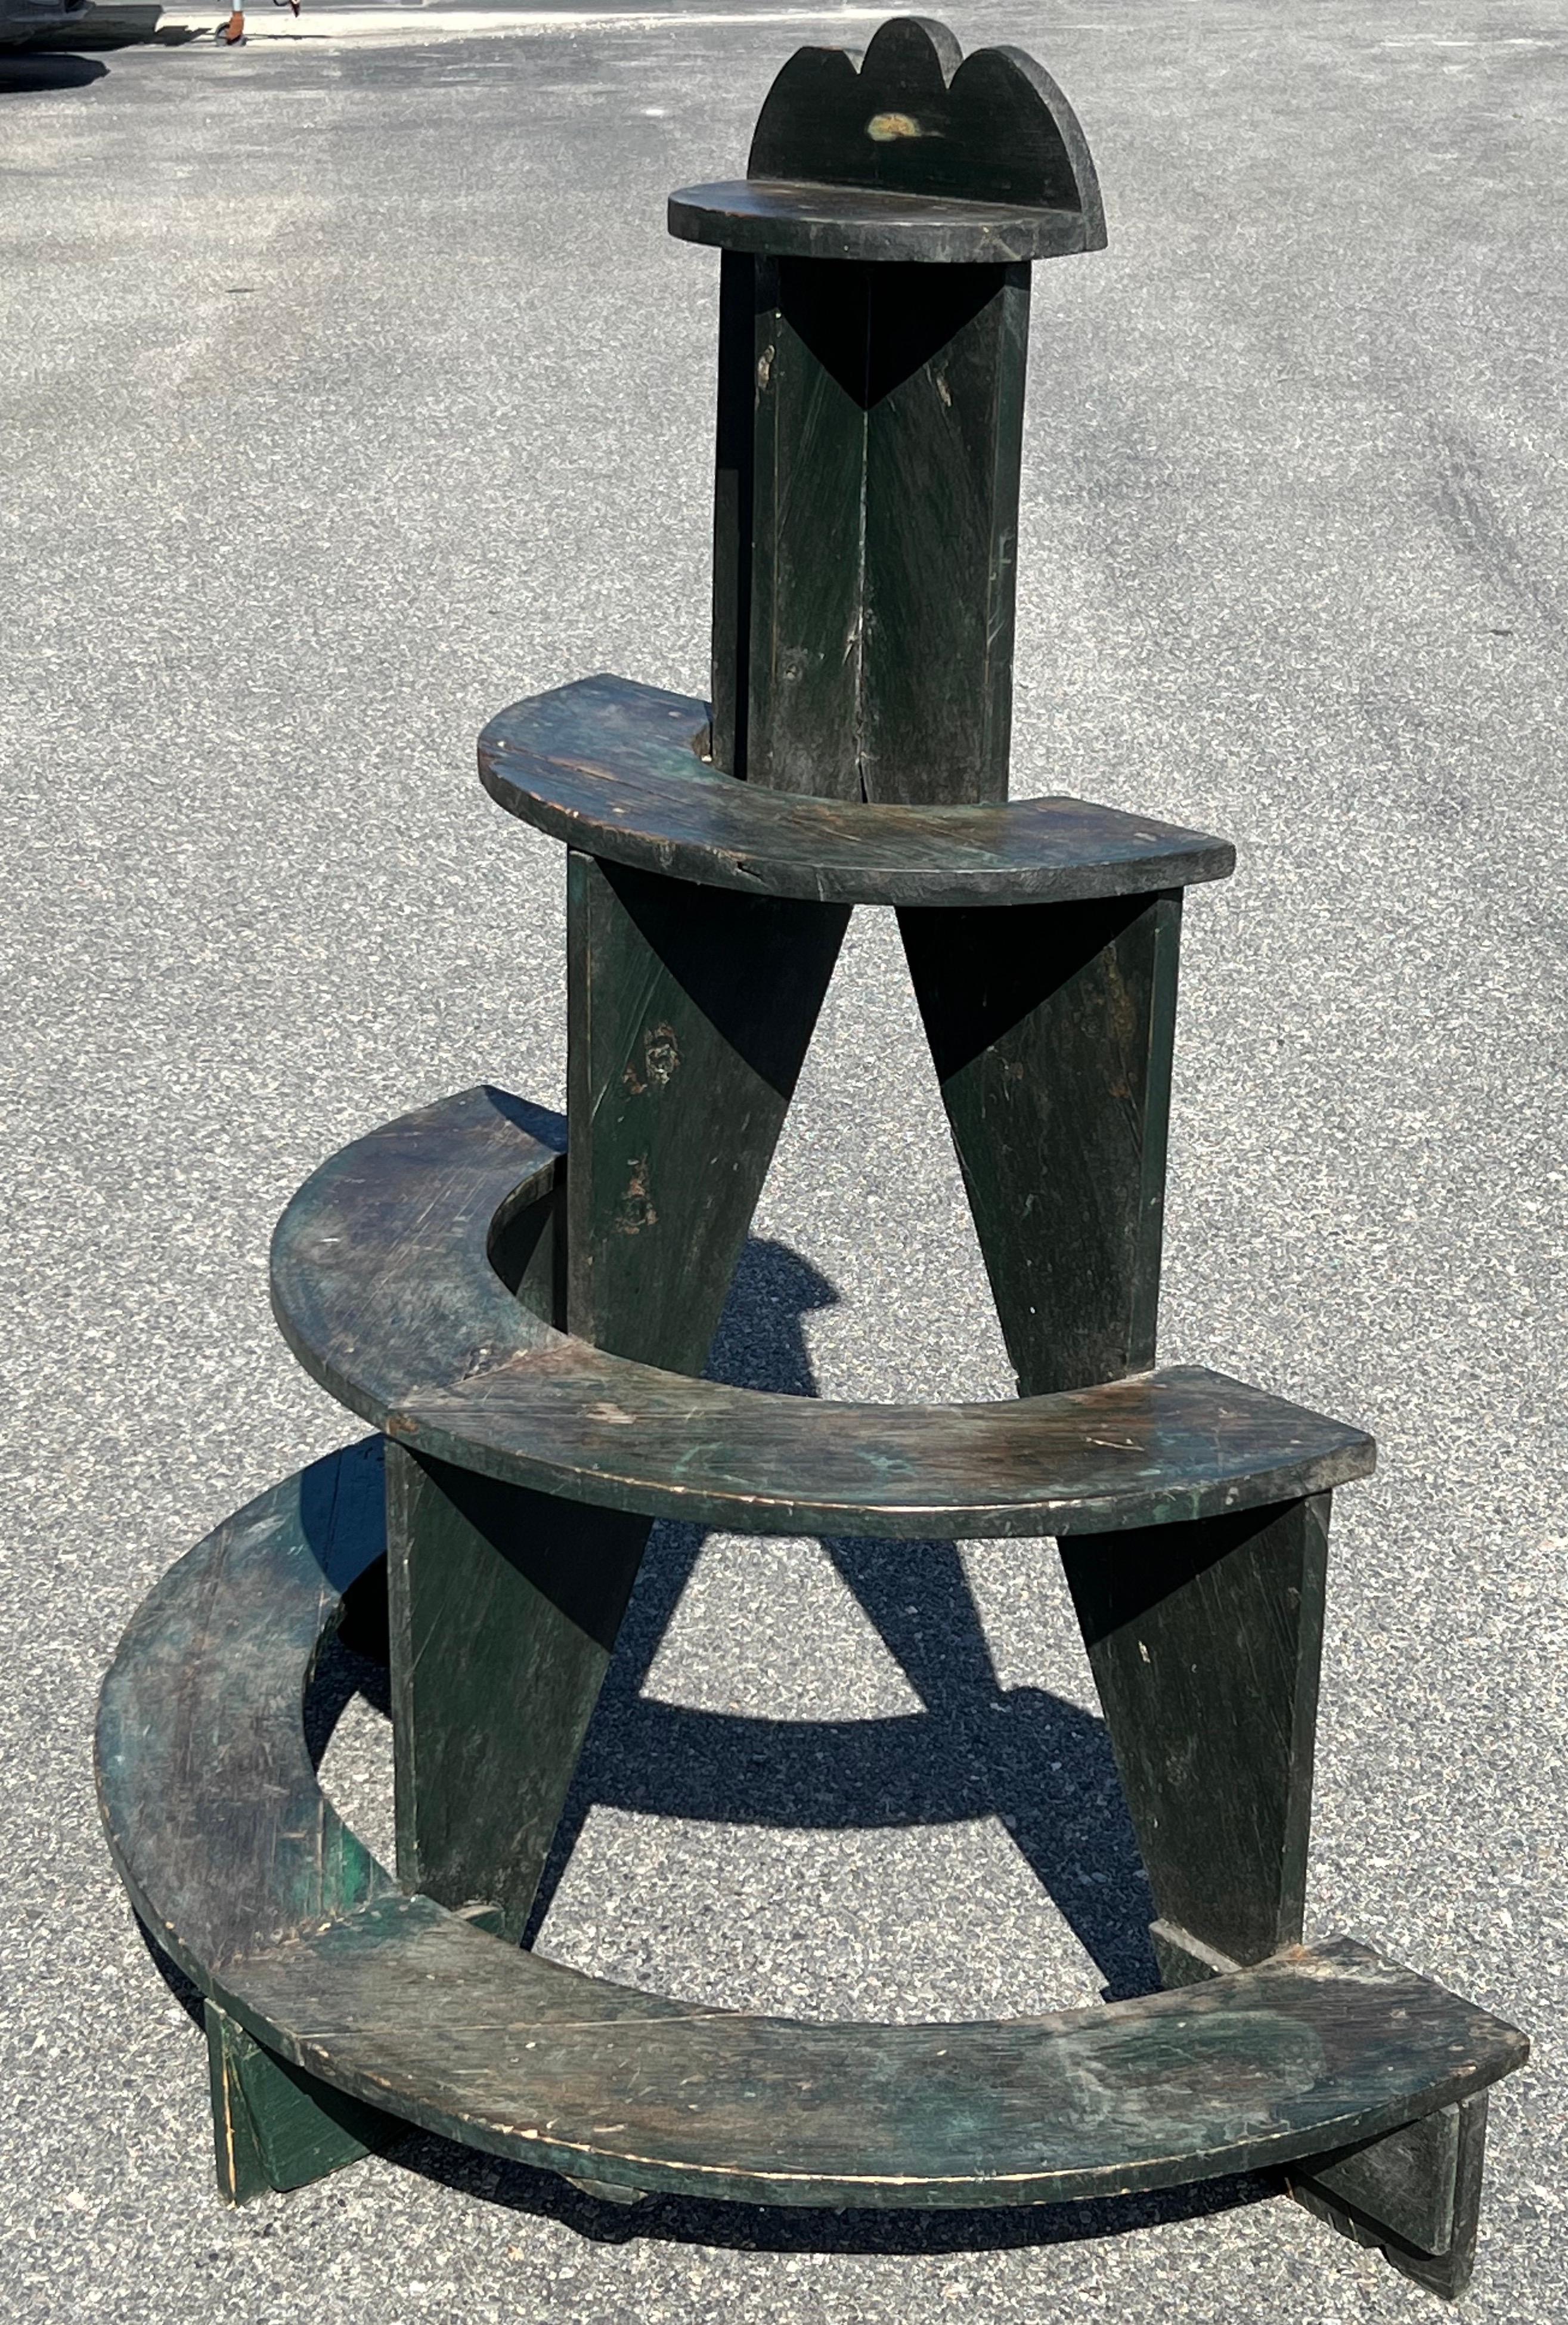 Four tiered plant stand in original green paint with patina and wear from use.  Sturdy construction and overall demi-lune form.